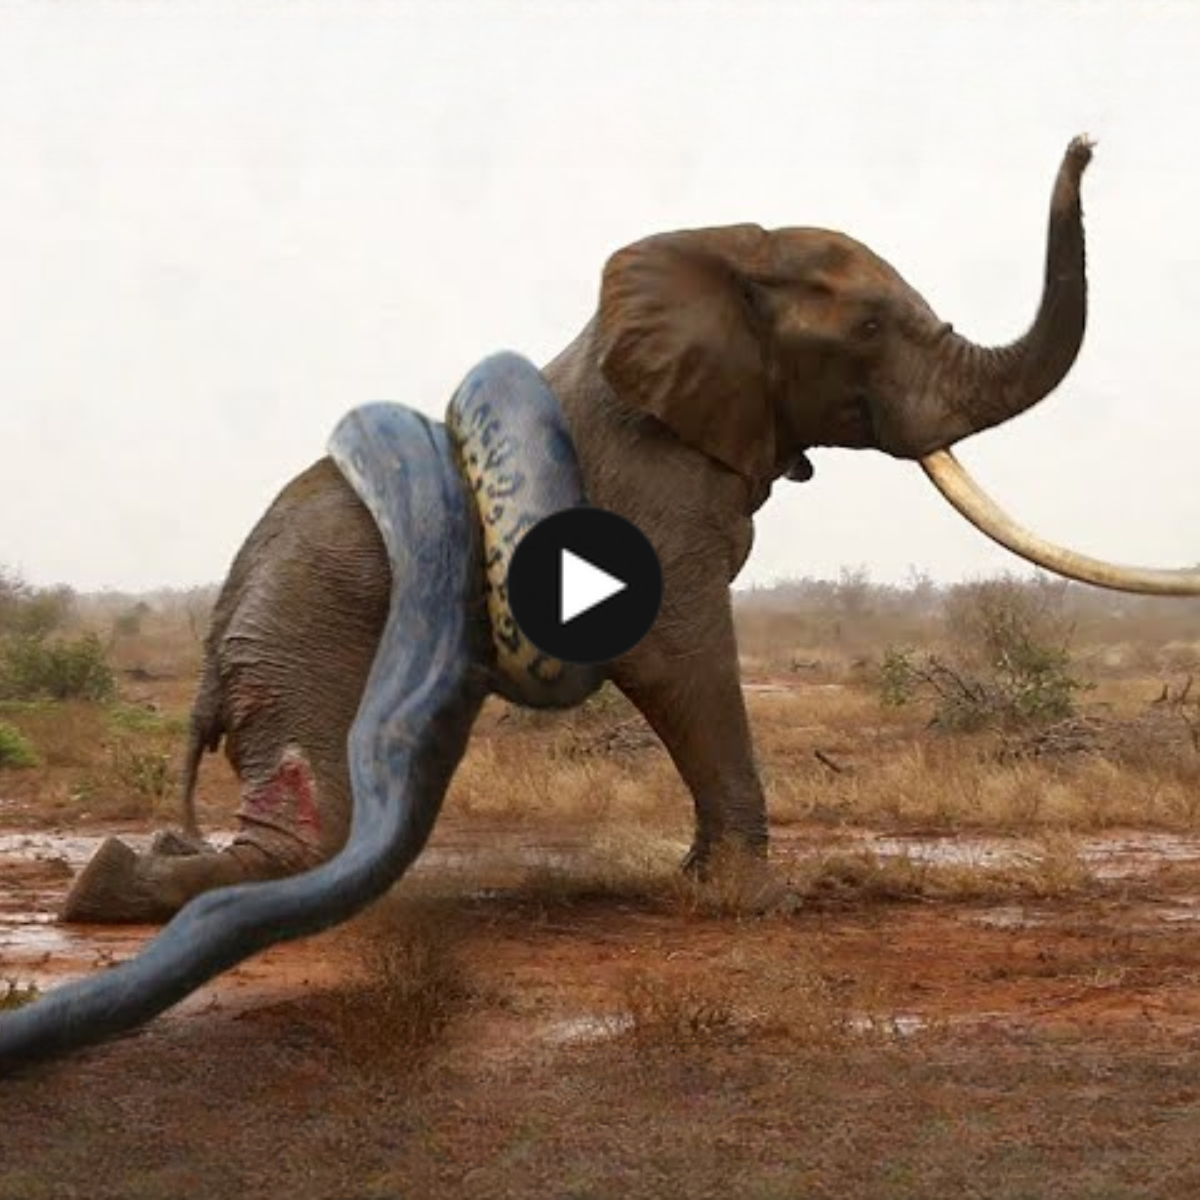 Because the enormous python was too strong for Elephant, she lost the tight combat terribly (video).